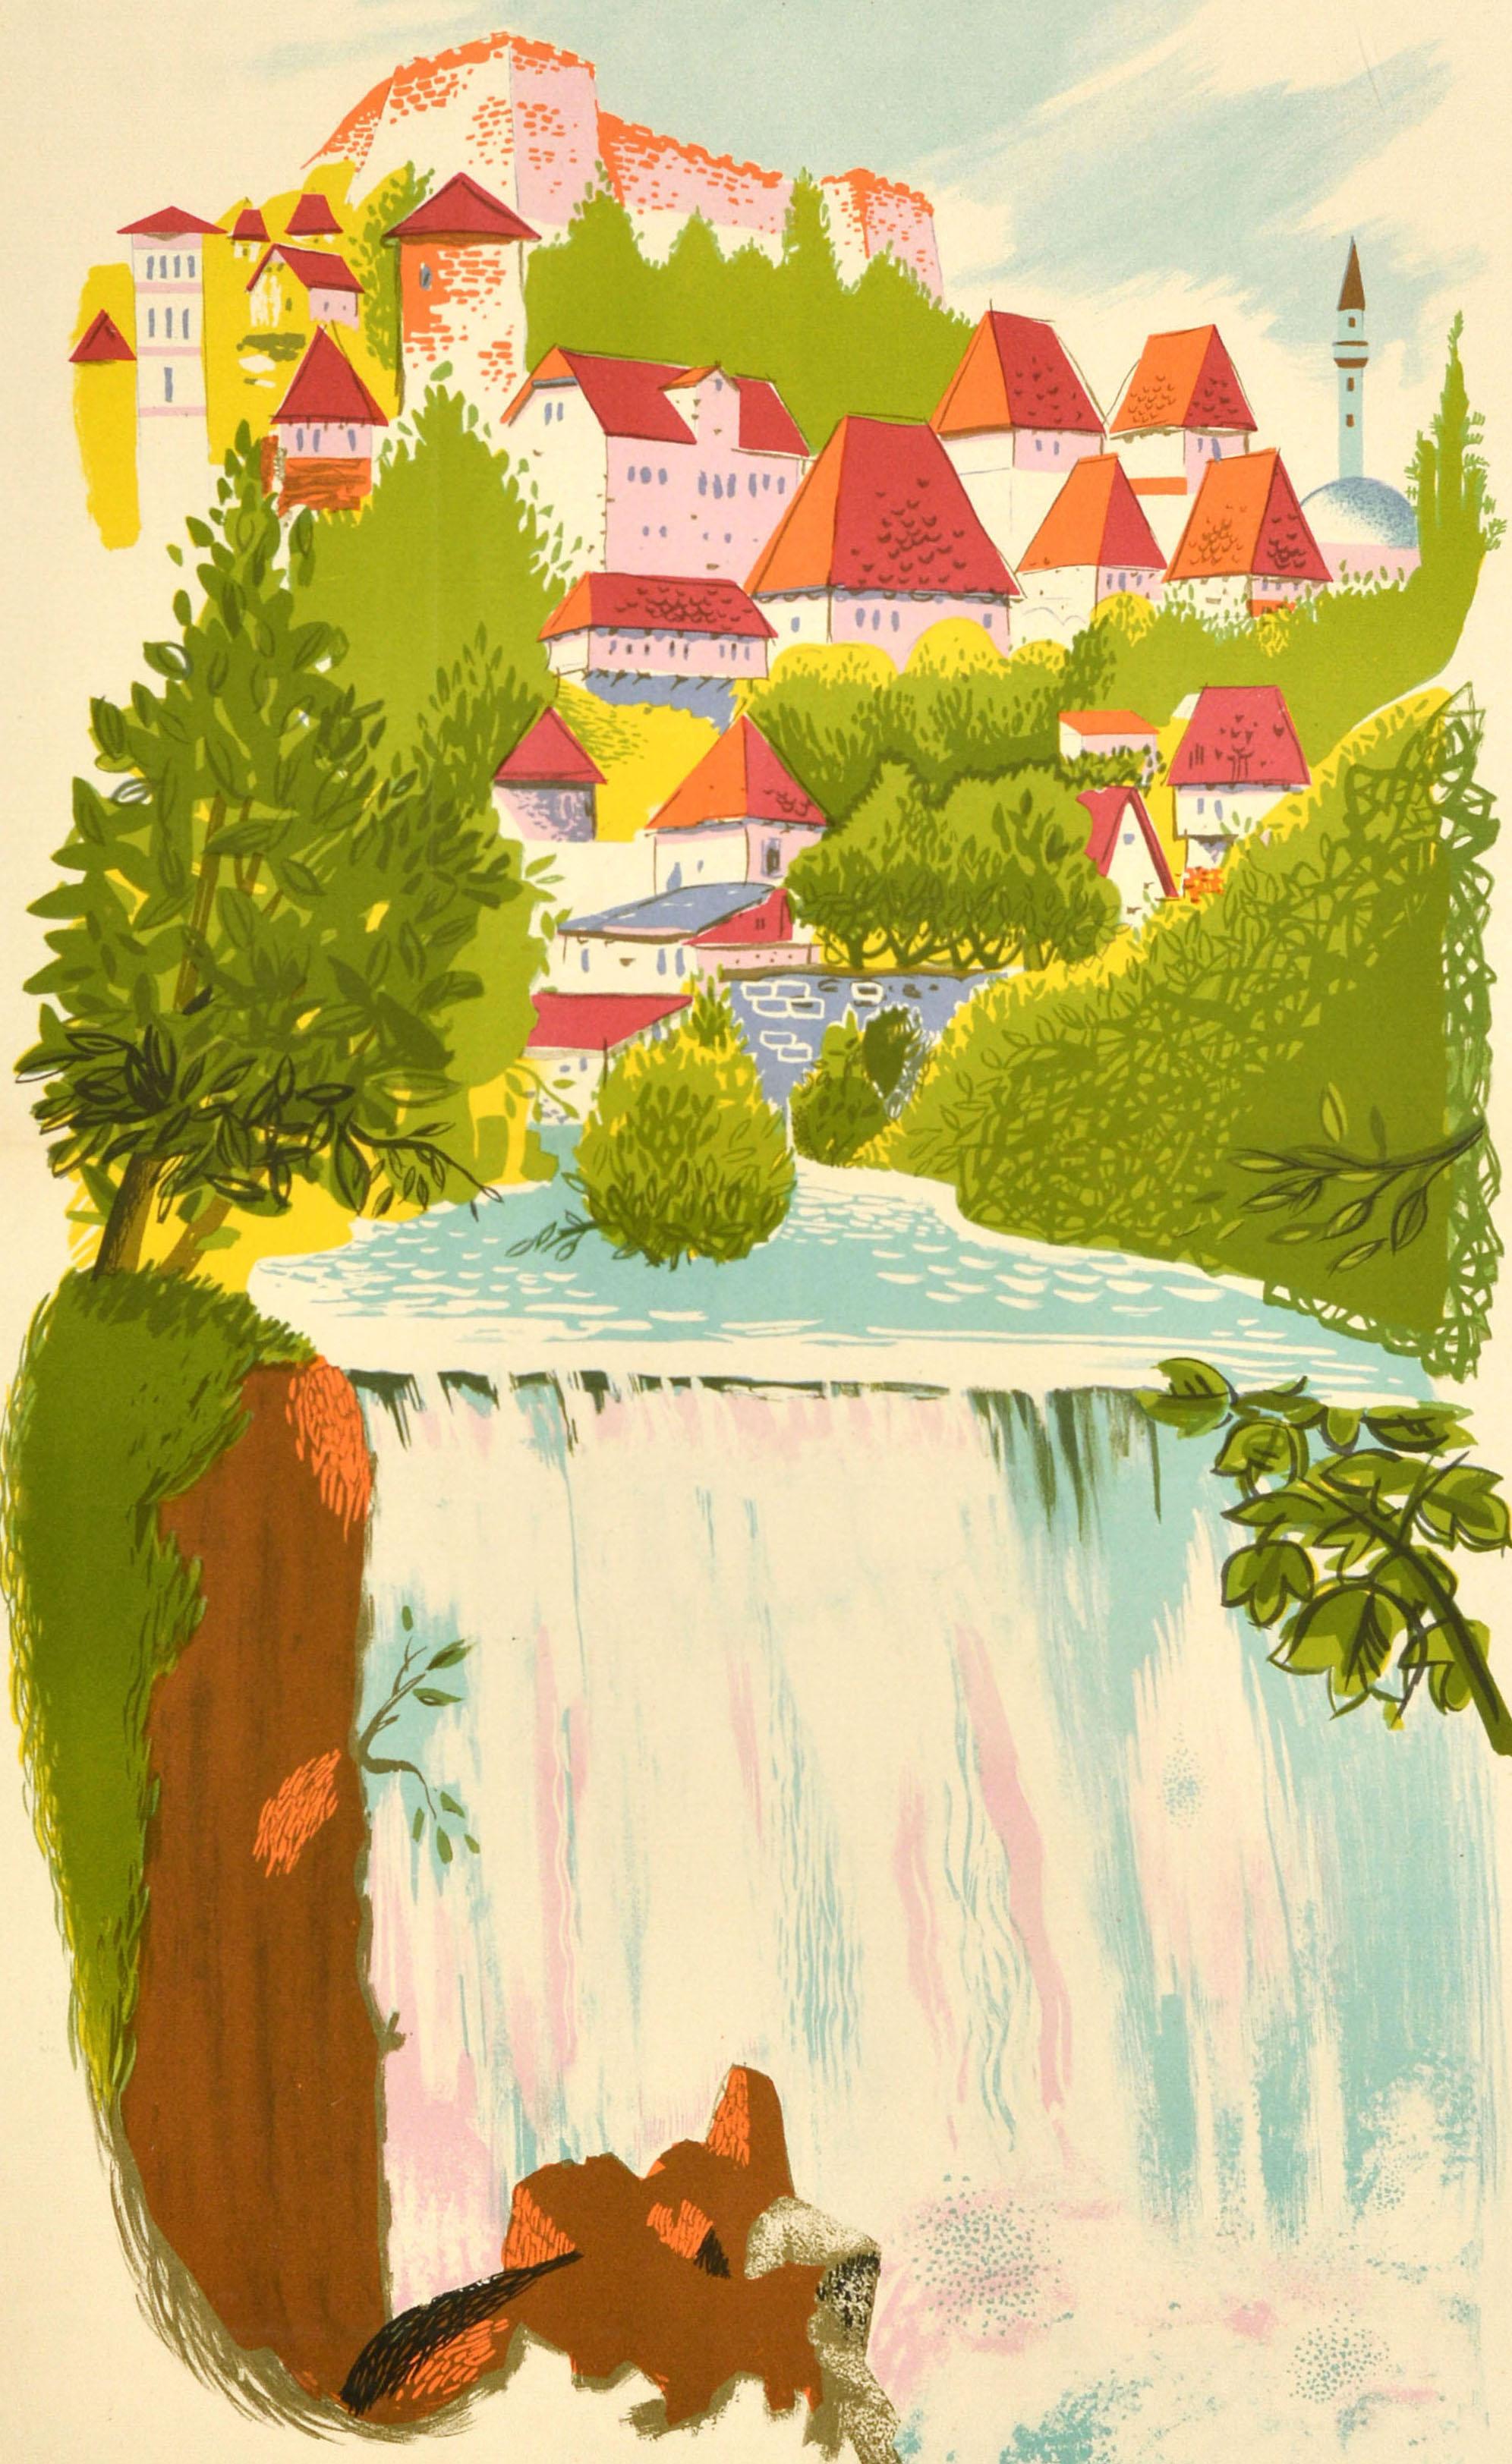 Original vintage travel poster for Jajce Jugoslavija featuring a scenic view of the walled town with red roof buildings, a church spire and trees leading down to the river and Pliva Waterfall cascading in the foreground. The historic town of Jajce